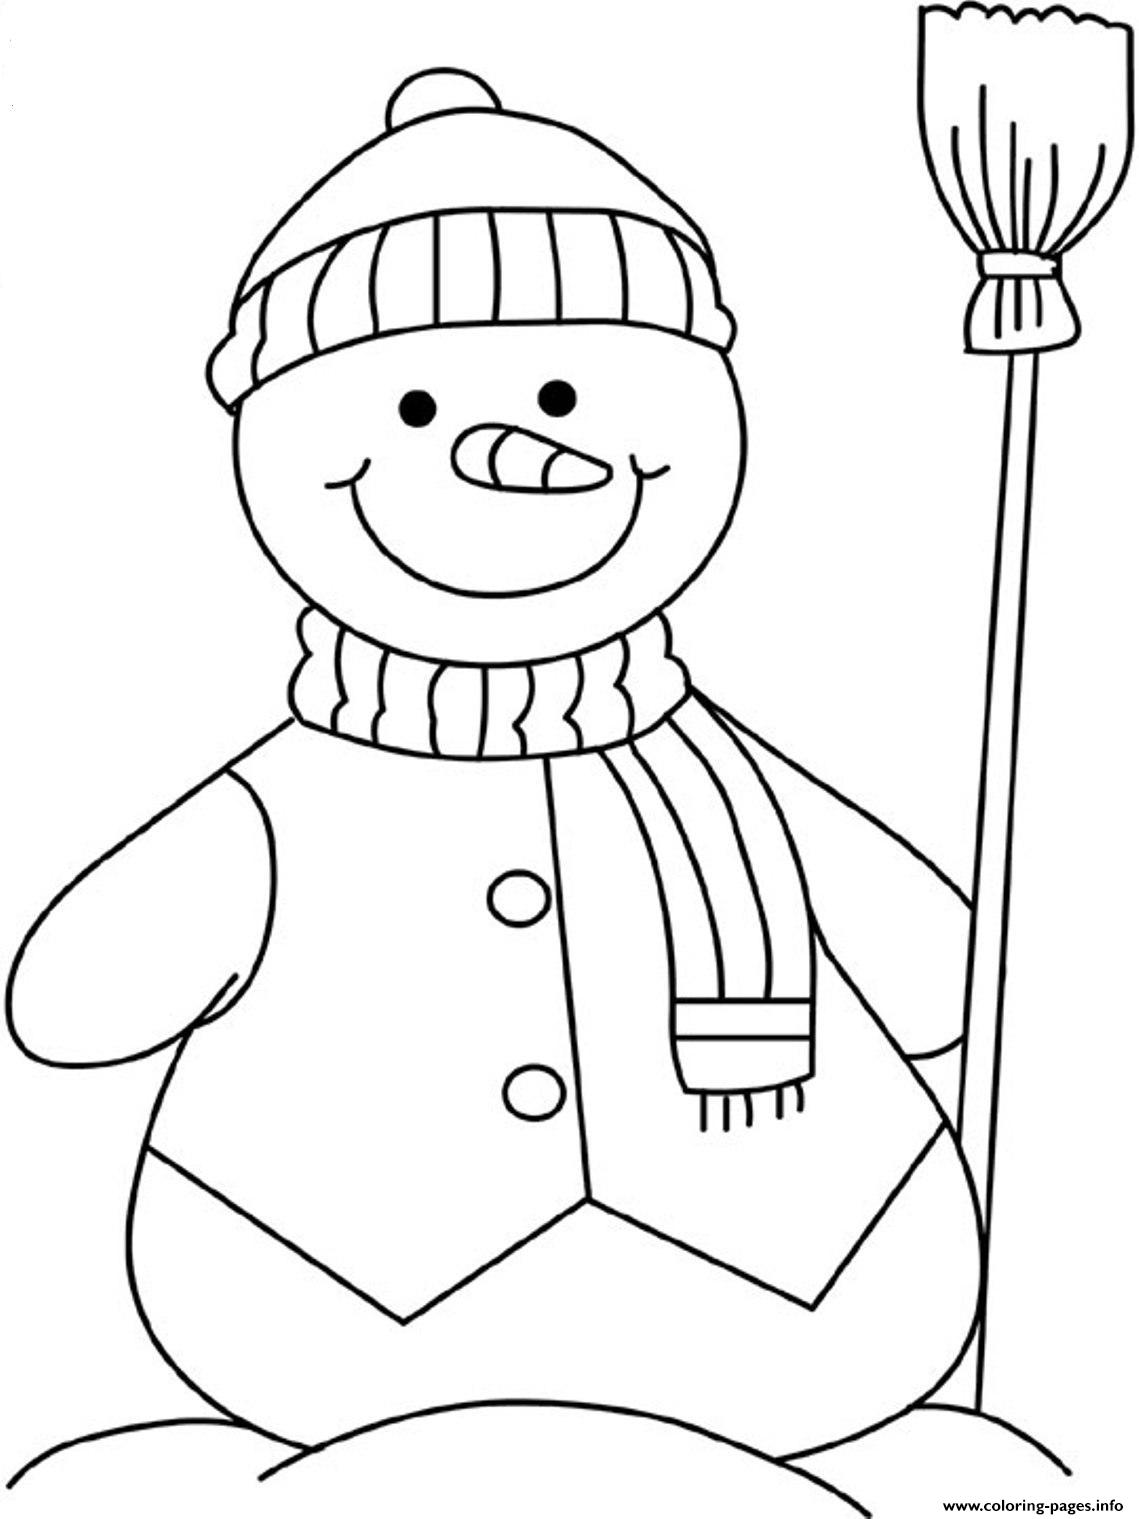 Winter S Snowman Free42fb coloring